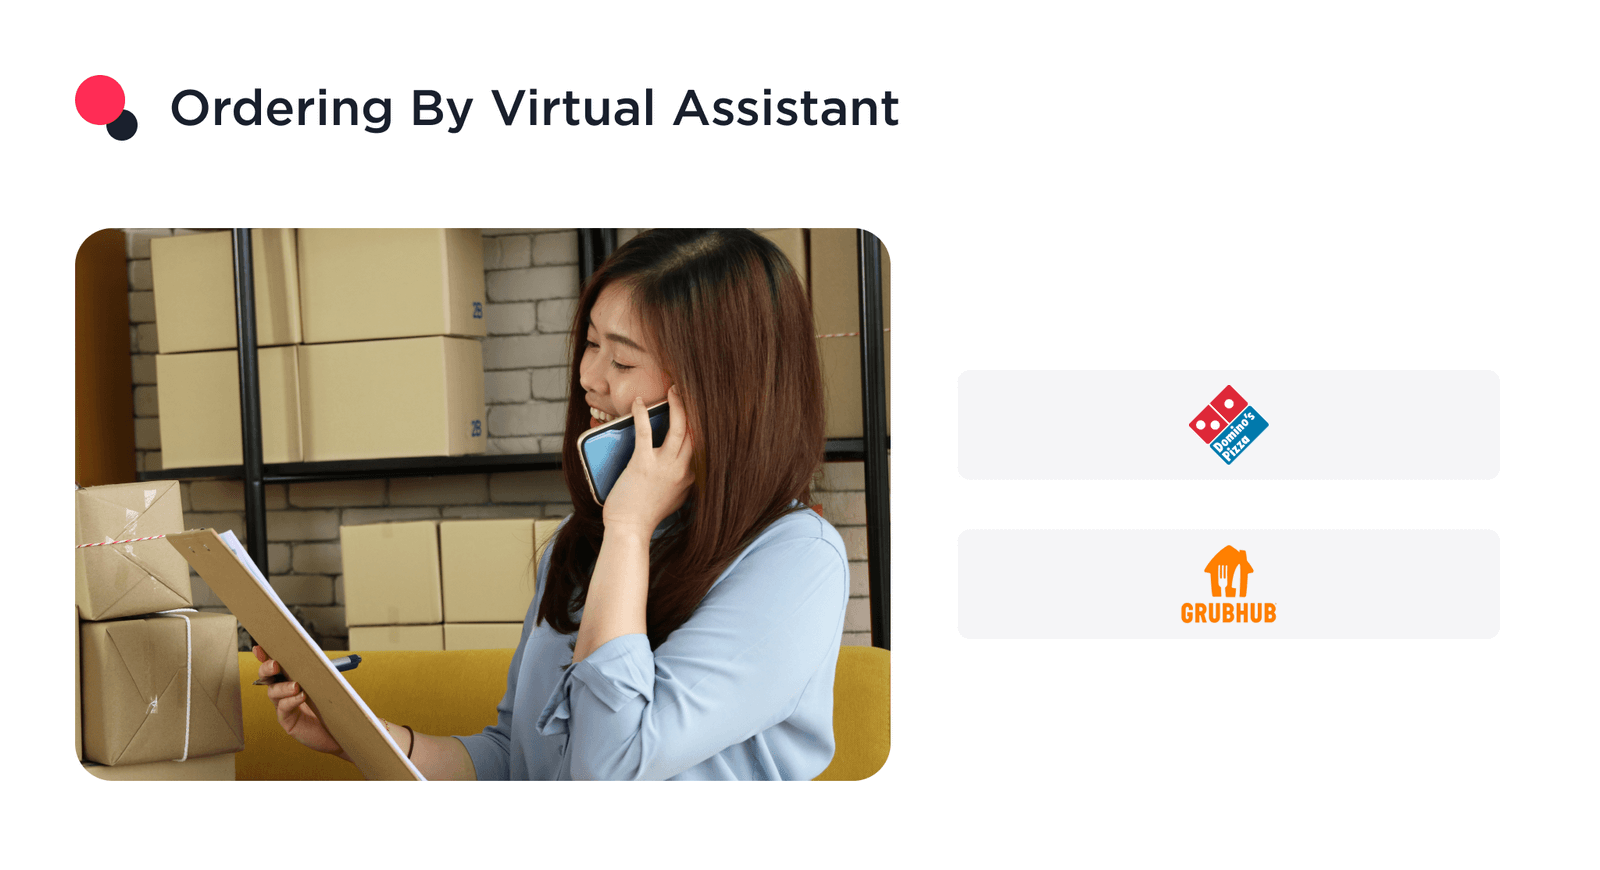 the image shows the food ordering by virtual assistant 